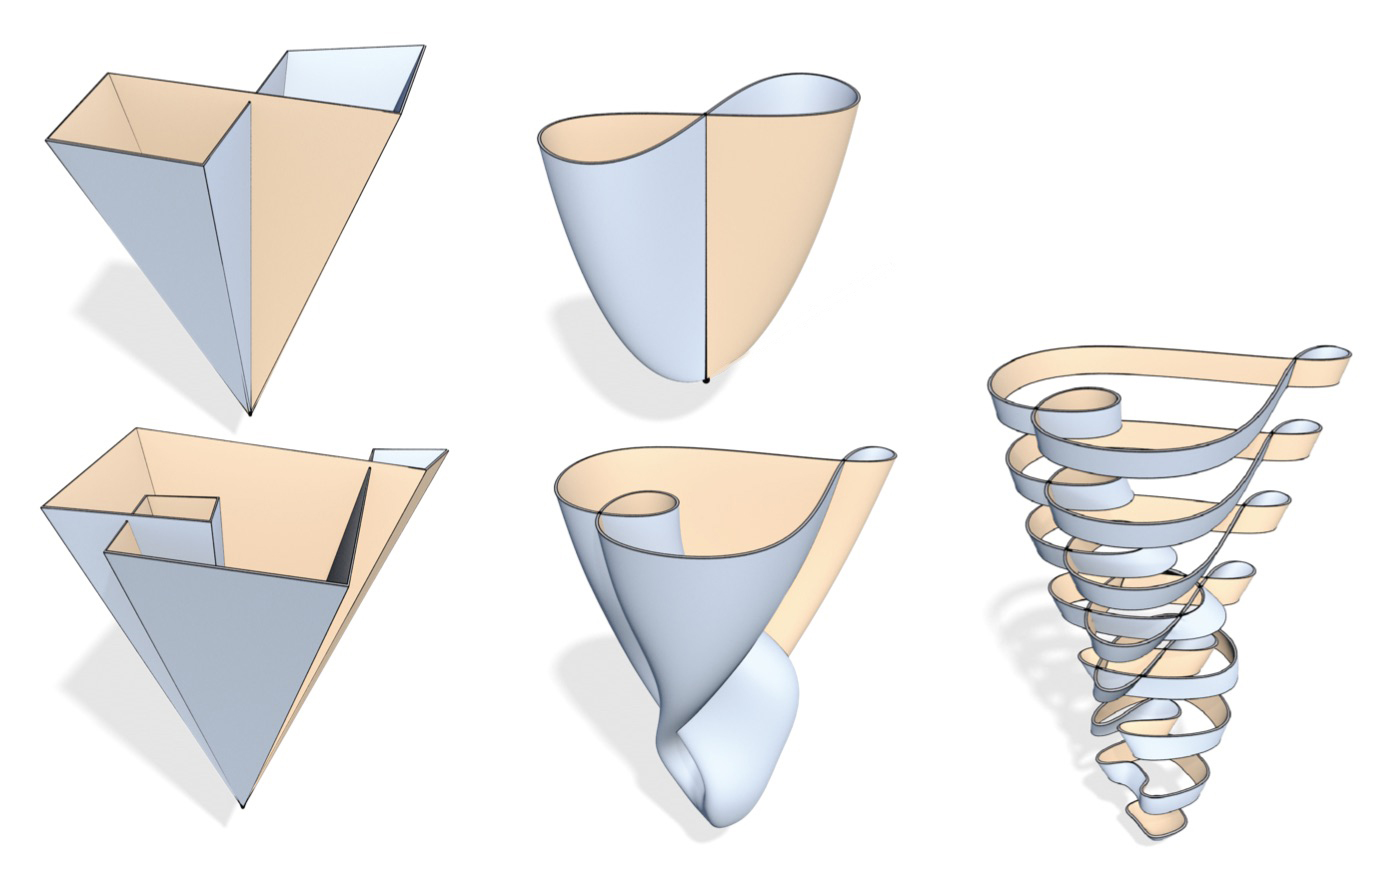 Image for "Illustrating Geometry and Topology"